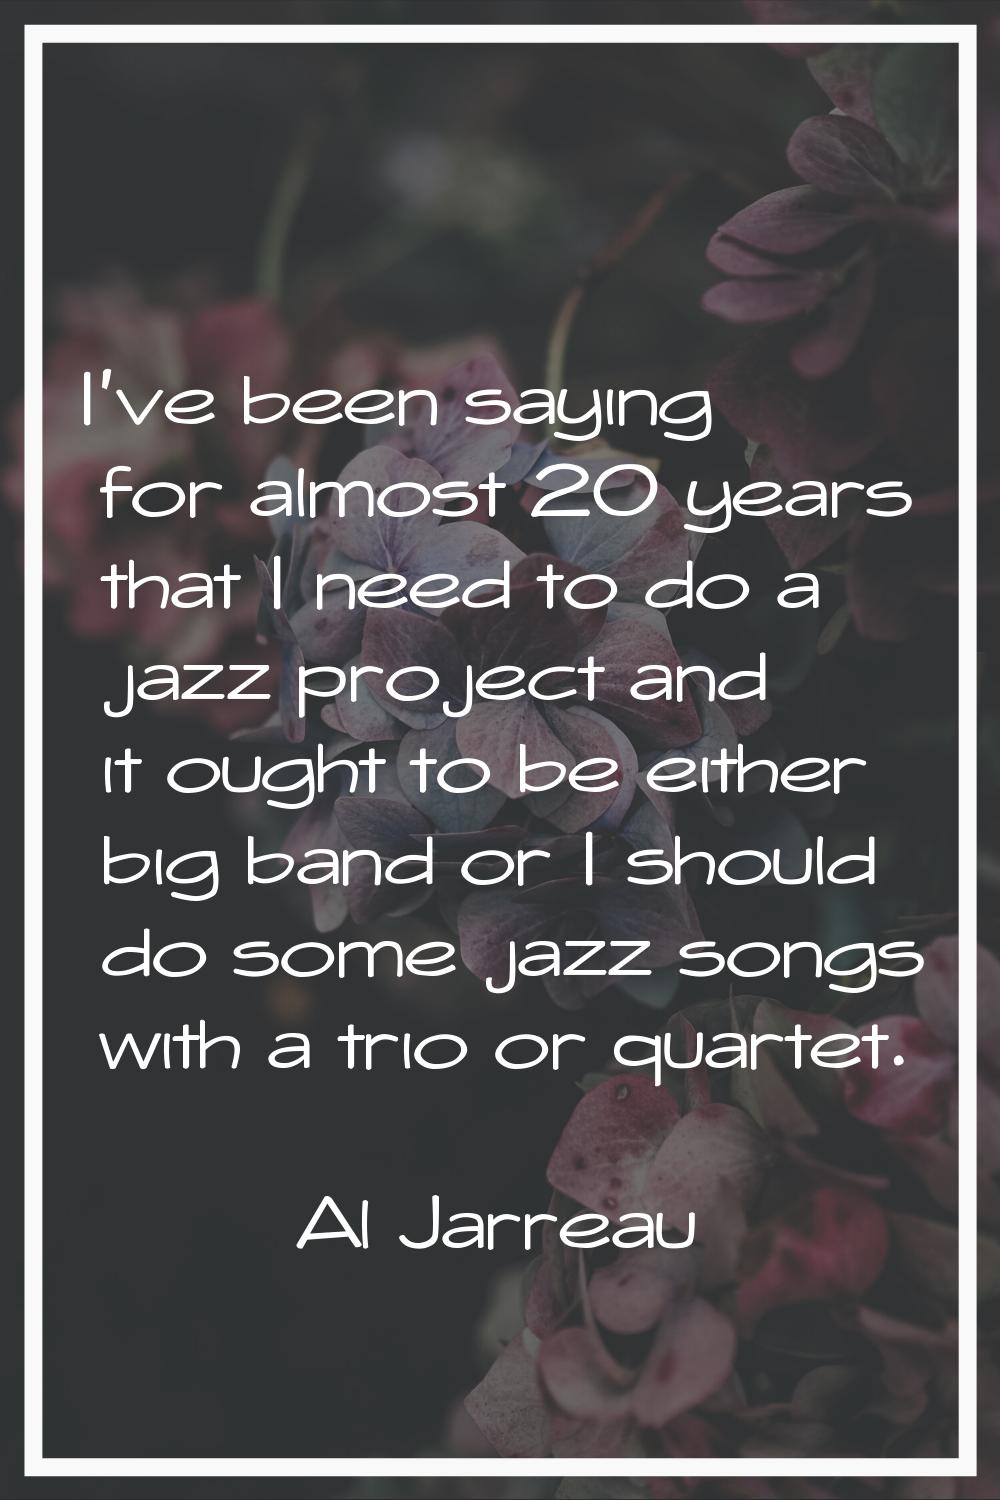 I've been saying for almost 20 years that I need to do a jazz project and it ought to be either big